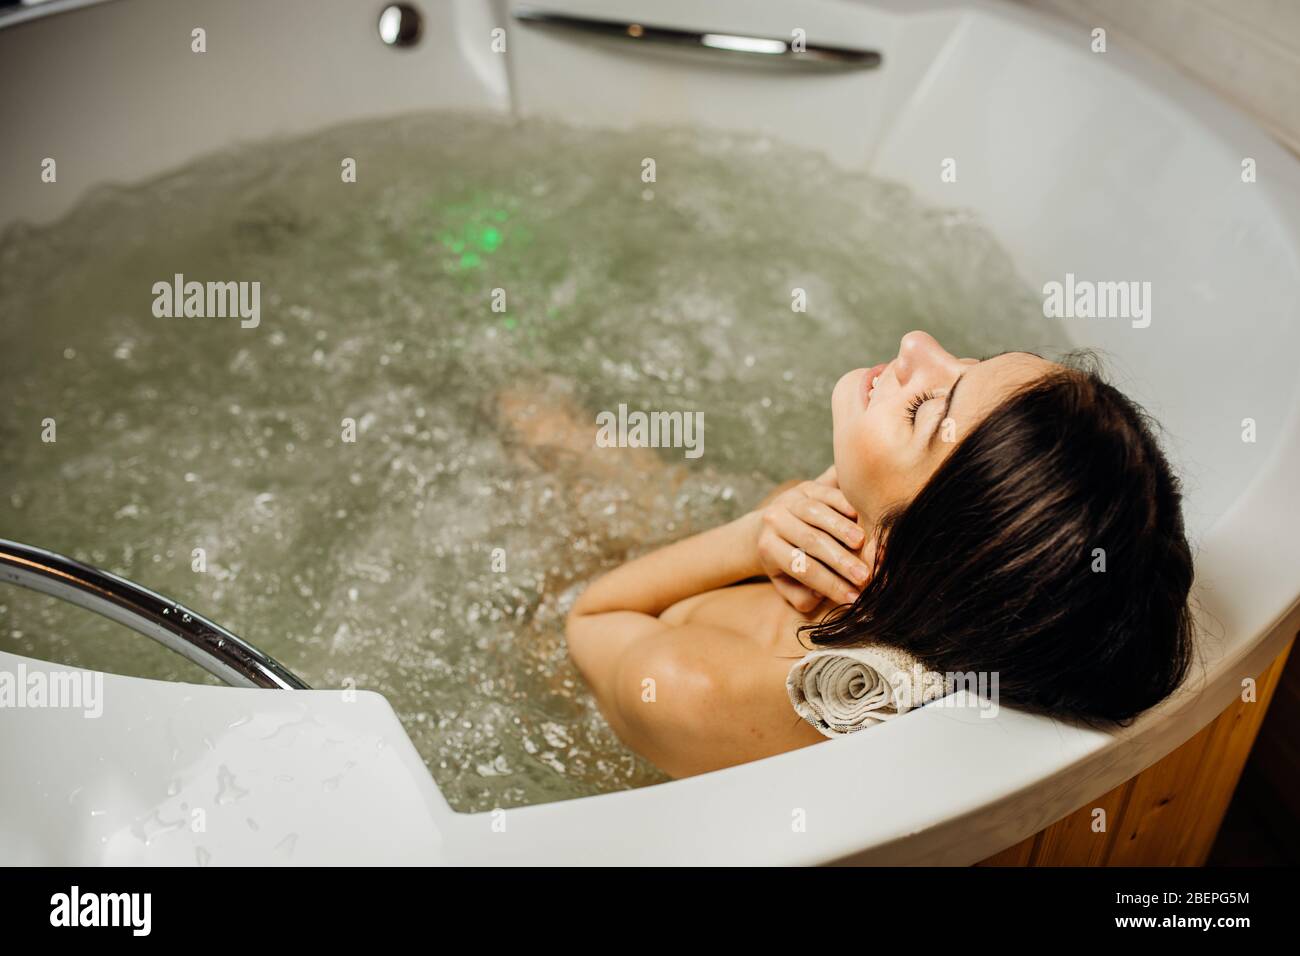 Woman relaxing at home in the hot tub bath ritual.Spa day moment in modern bathroom indoors jacuzzi tub.Leisure activity.Self care.Good personal hygie Stock Photo